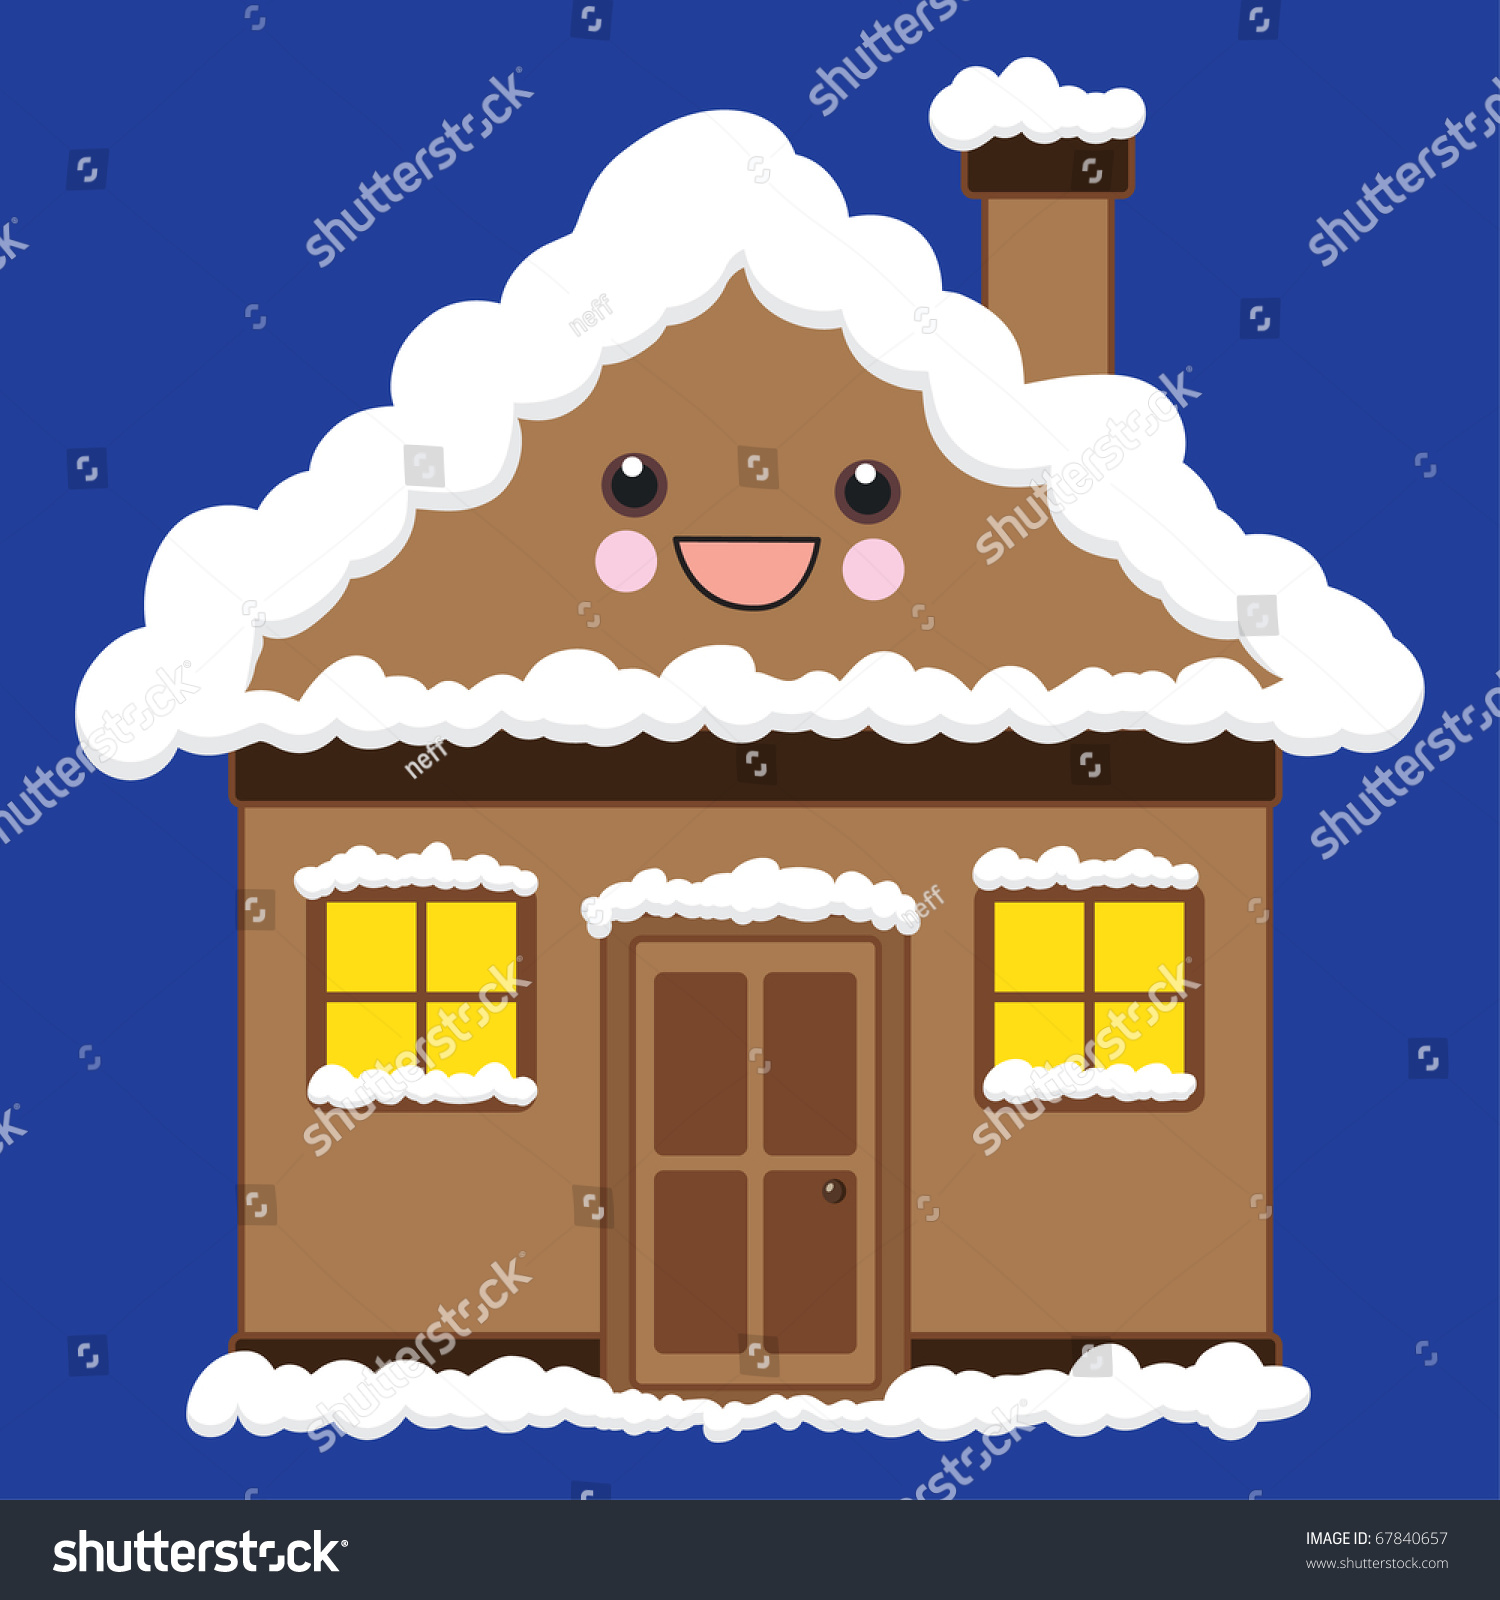 house with snow clipart - photo #26